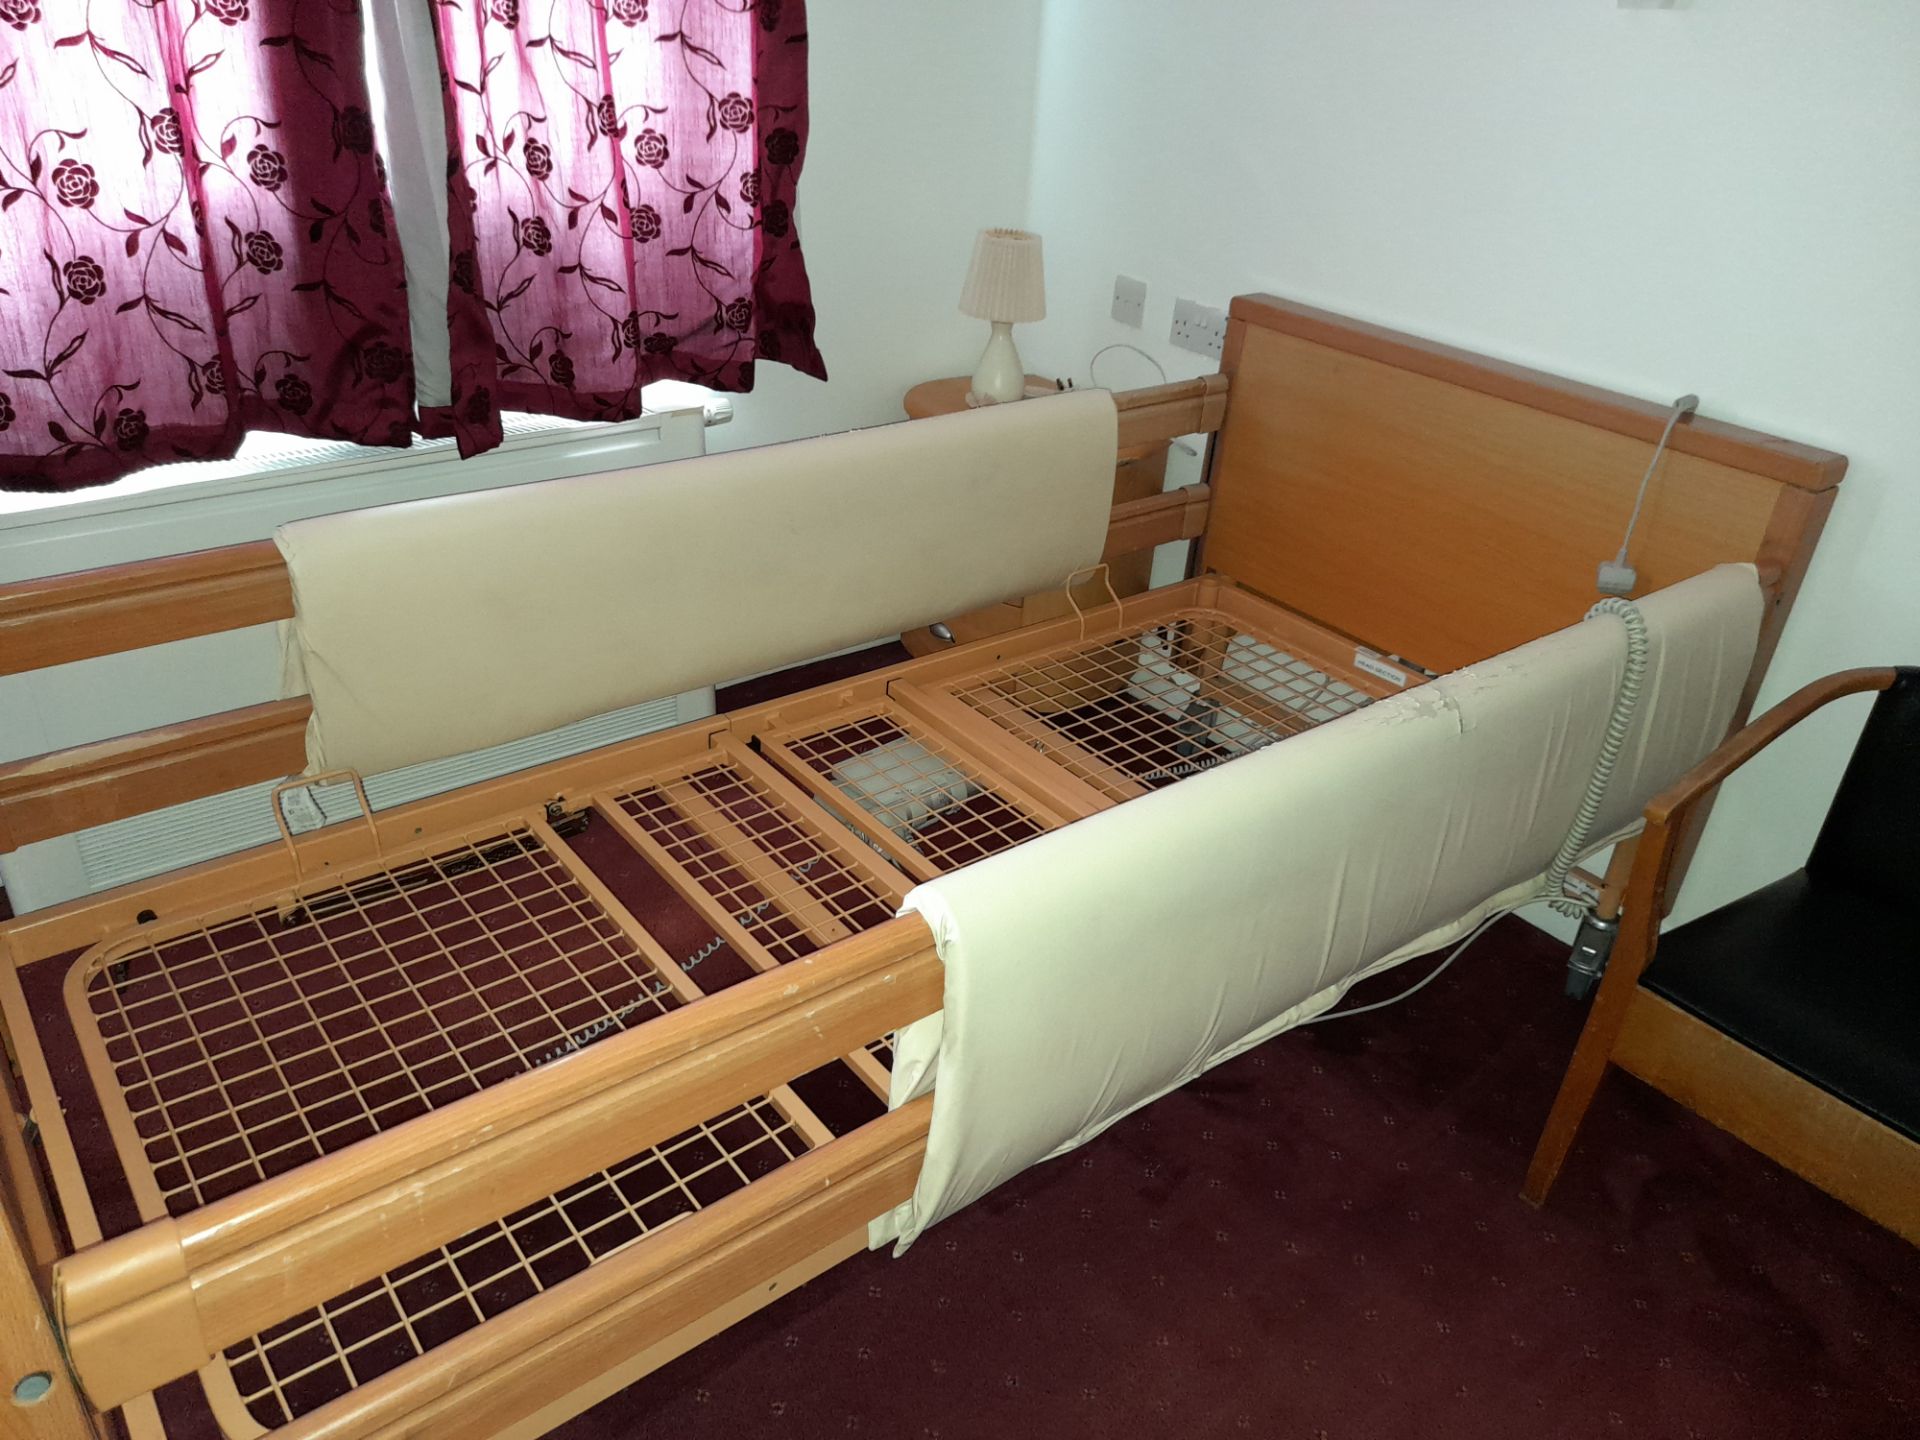 Contents of Bedroom 25 to include; Profile bed, Wardrobe, Chest of Drawers, Bedside Cabinet, - Image 2 of 4